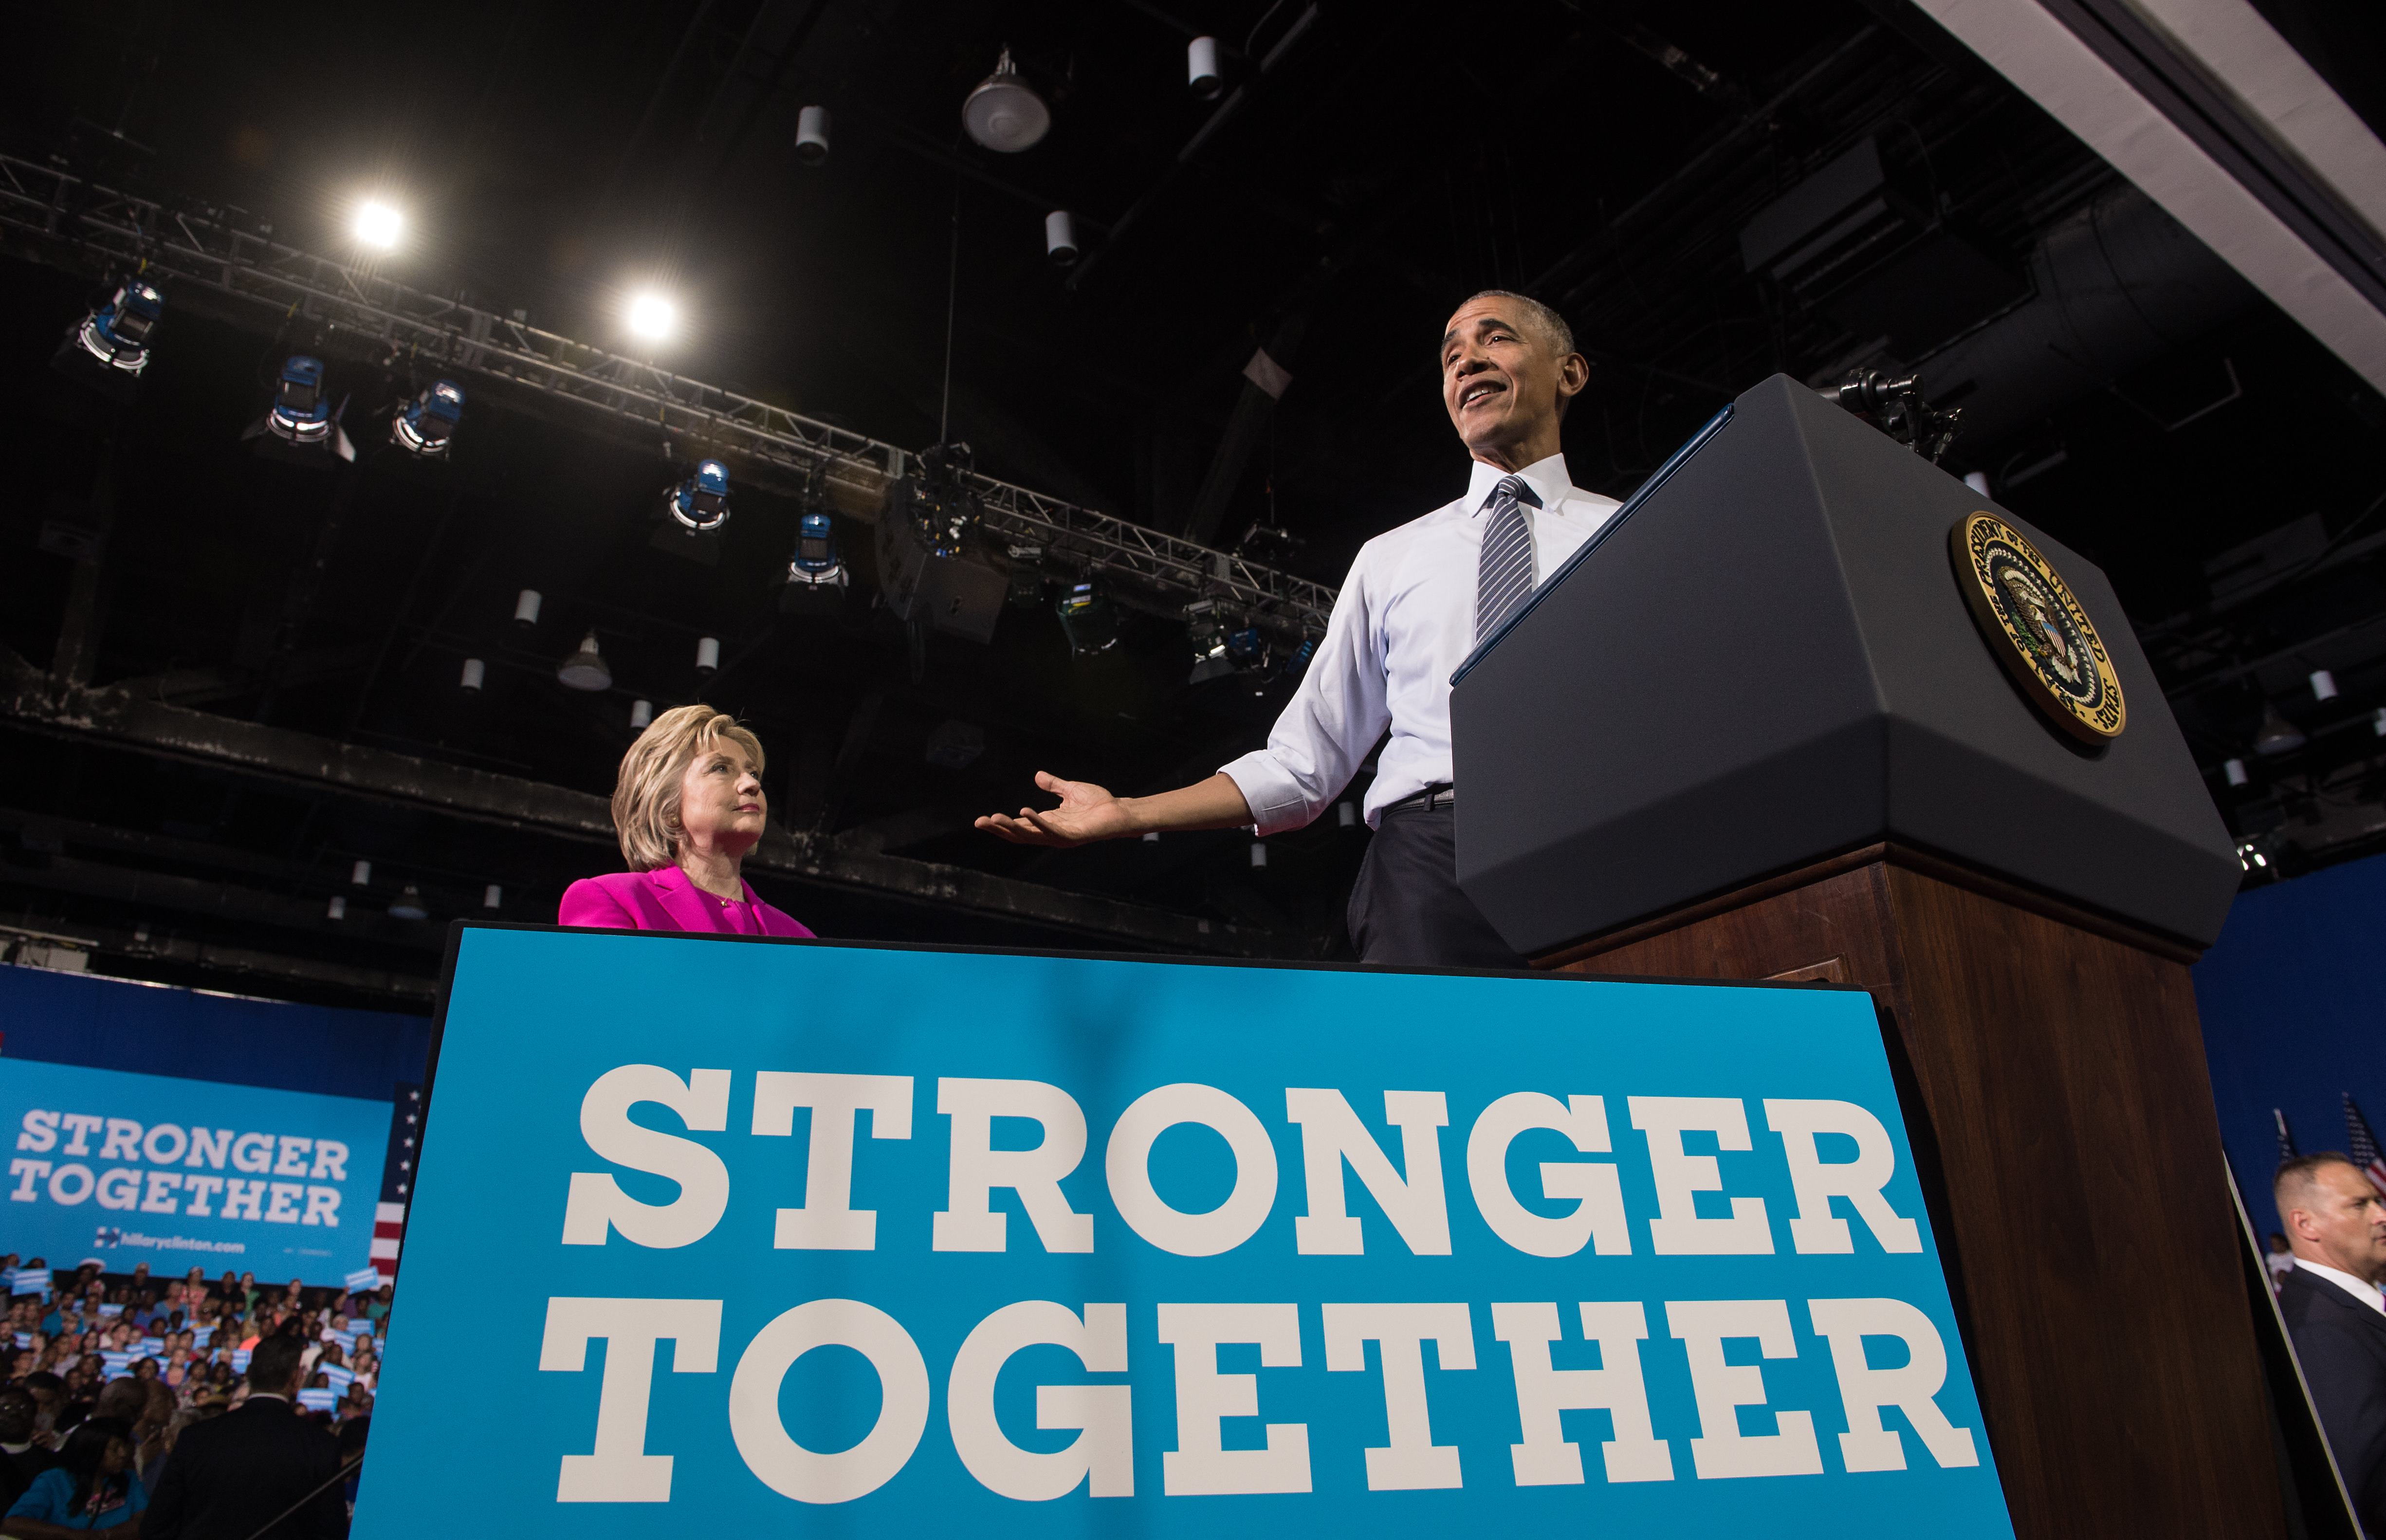 US President Barack Obama speaks at a campaign event for Democratic presidential candidate Hillary Clinton (L) in Charlotte, North Carolina, on July 5, 2016. US President Barack Obama threw his full weight behind Hillary Clinton's bid to succeed him, extolling the experience and fighting spirit of his former secretary of state at their first joint campaign appearance. "I'm here today because I believe in Hillary Clinton," Obama told the rally in Charlotte, North Carolina. "There has never been any man or woman more qualified for this office." / AFP PHOTO / NICHOLAS KAMM